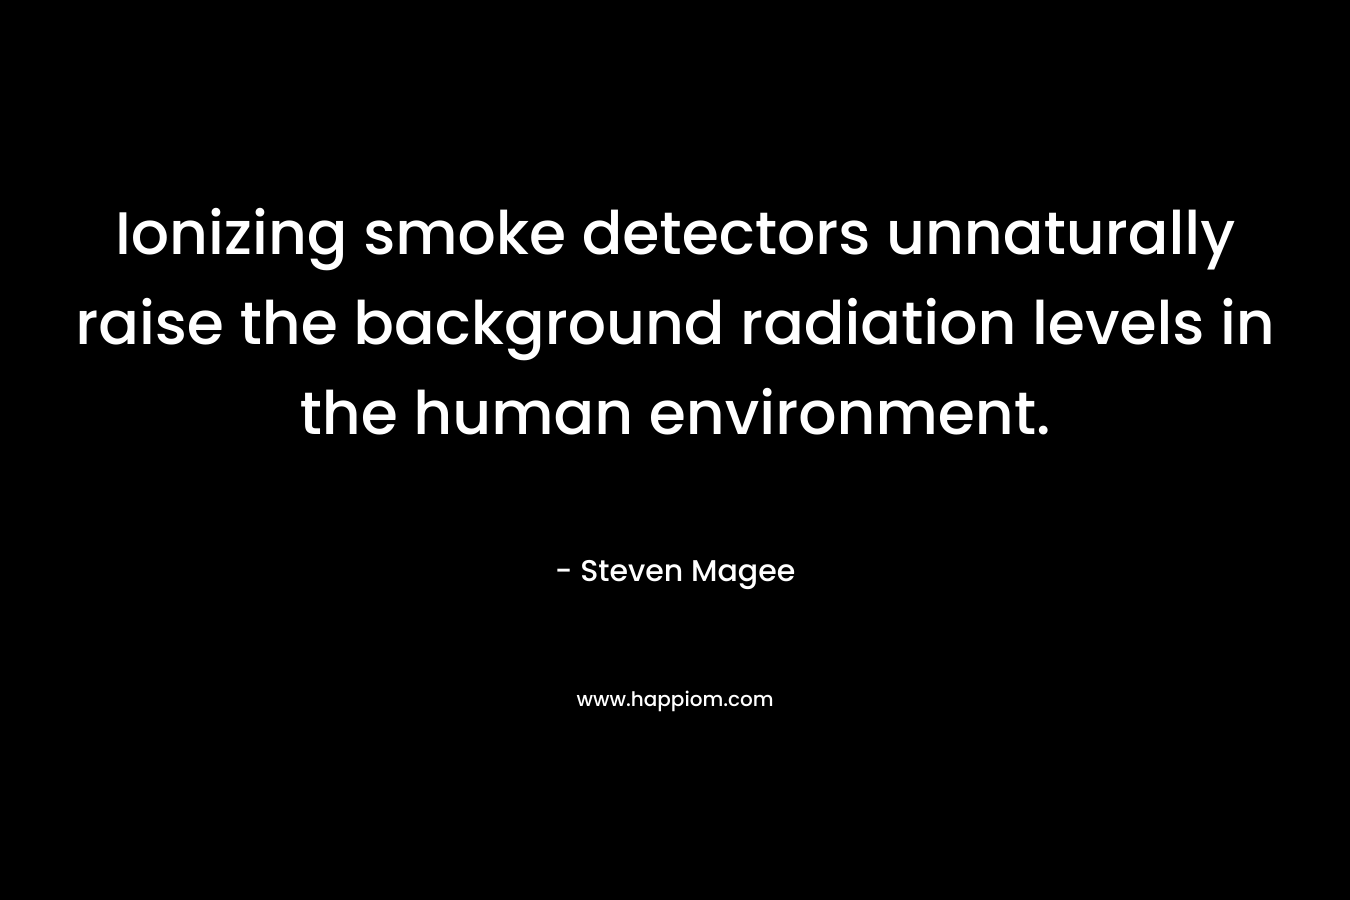 Ionizing smoke detectors unnaturally raise the background radiation levels in the human environment. – Steven Magee